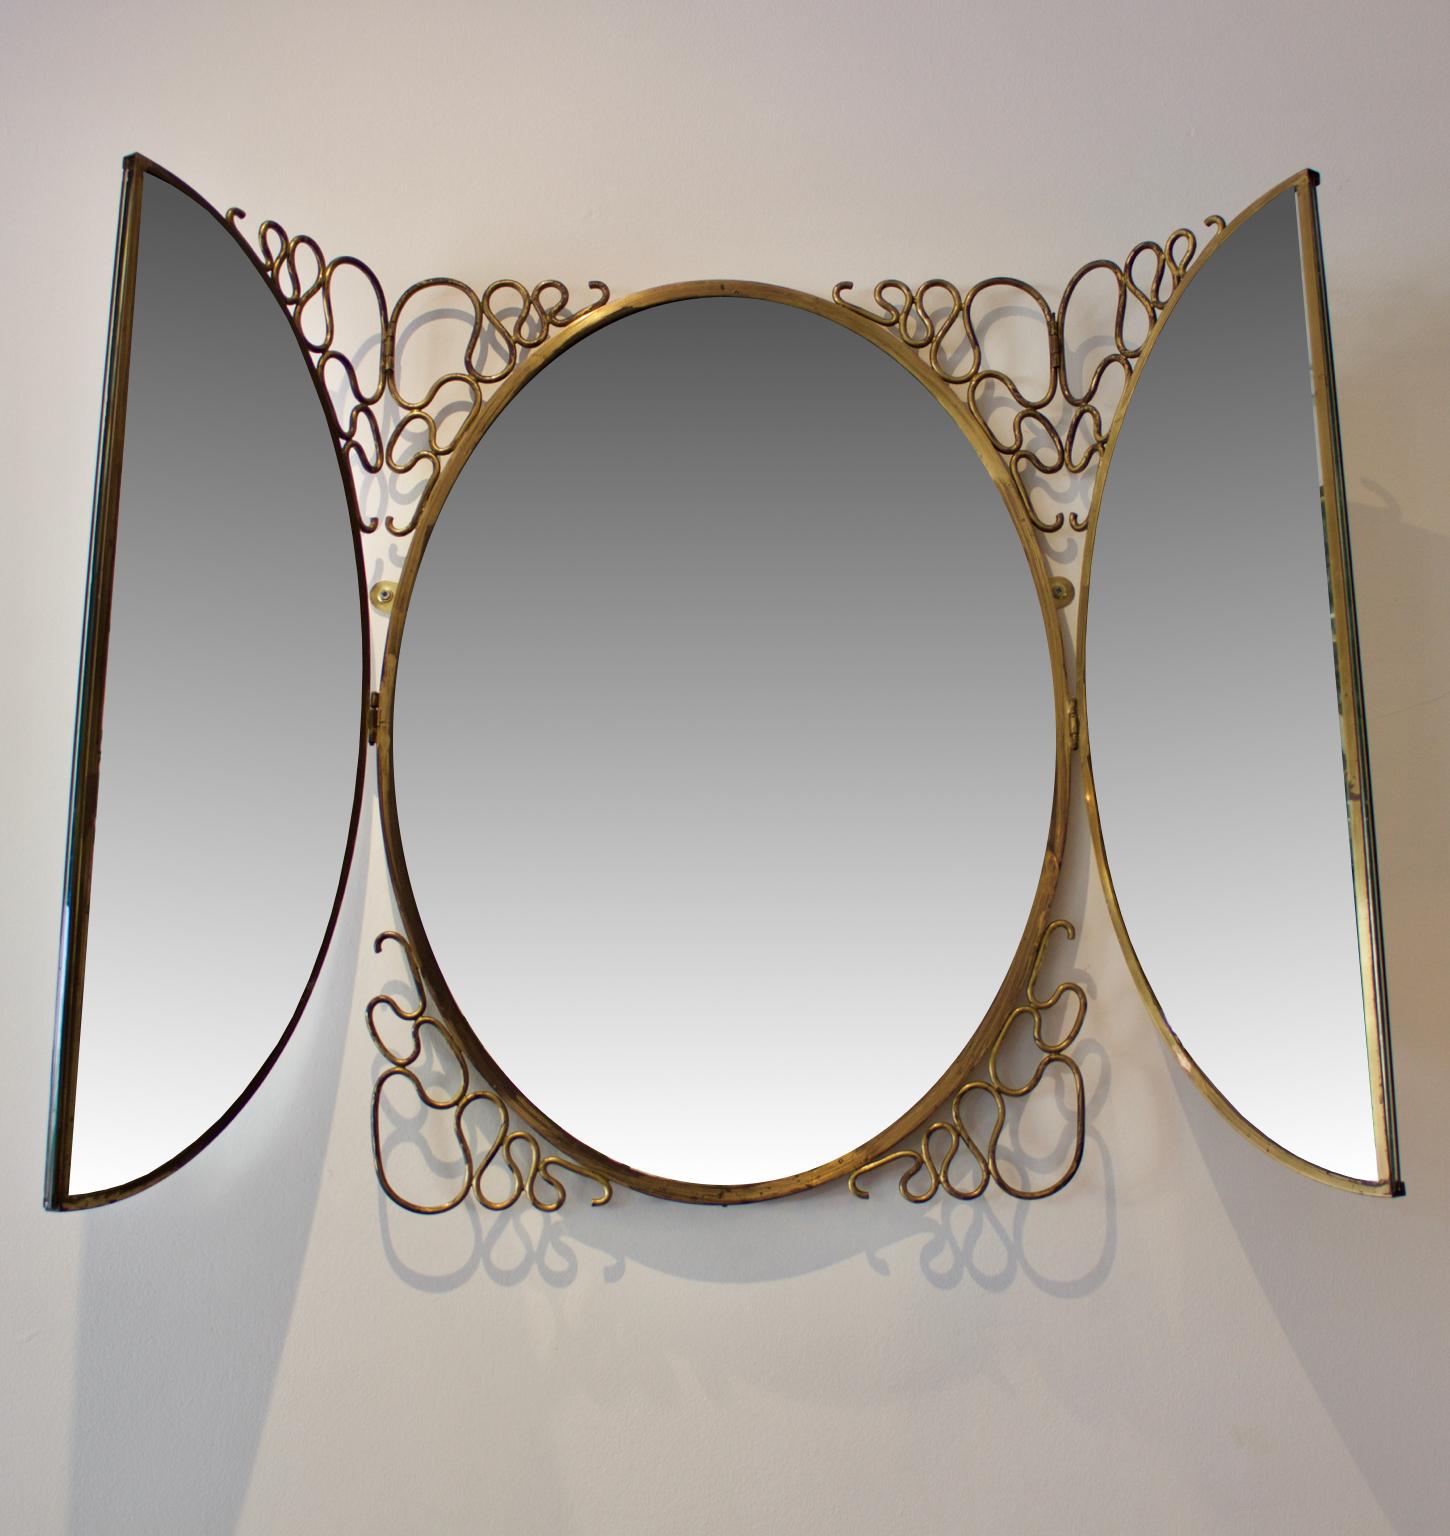 A decorative folding mirror, Italy, 1950s. In the style of Gio Ponti or Borsani Varedo.

The oval mirror is made up of three sections with two outer leaves opening to reveal a central oval mirror. The outer leaves have mirrors on both sides, and